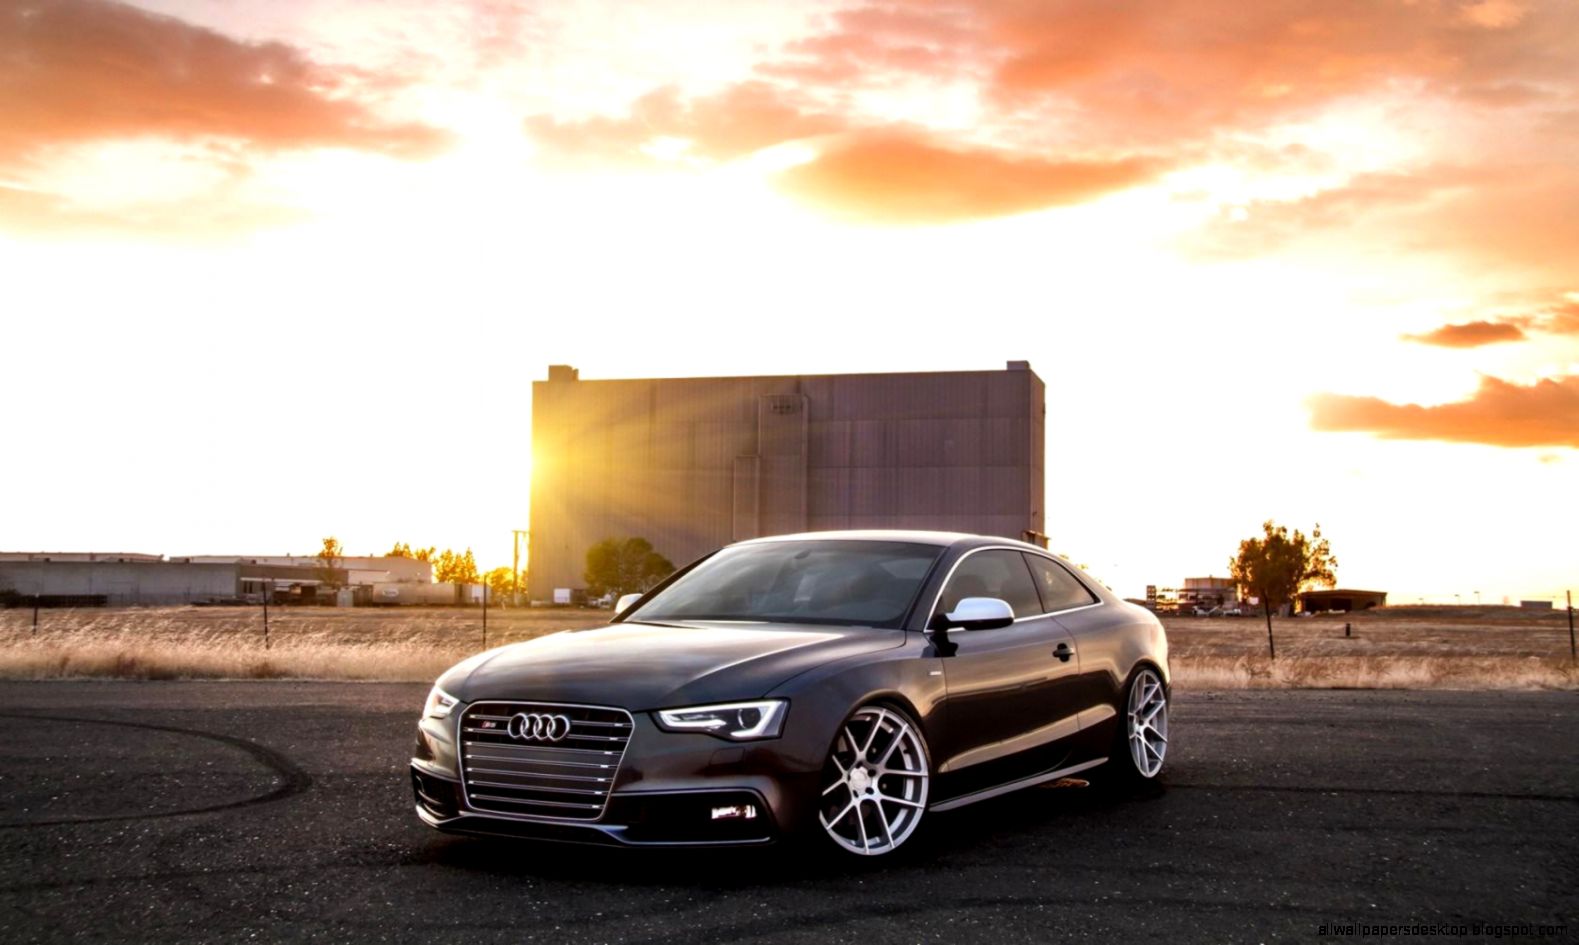 Audi Rs7 Wallpapers 2016 Hd Wallpapers Wide - Audi Rs7 Wallpaper Wide - HD Wallpaper 